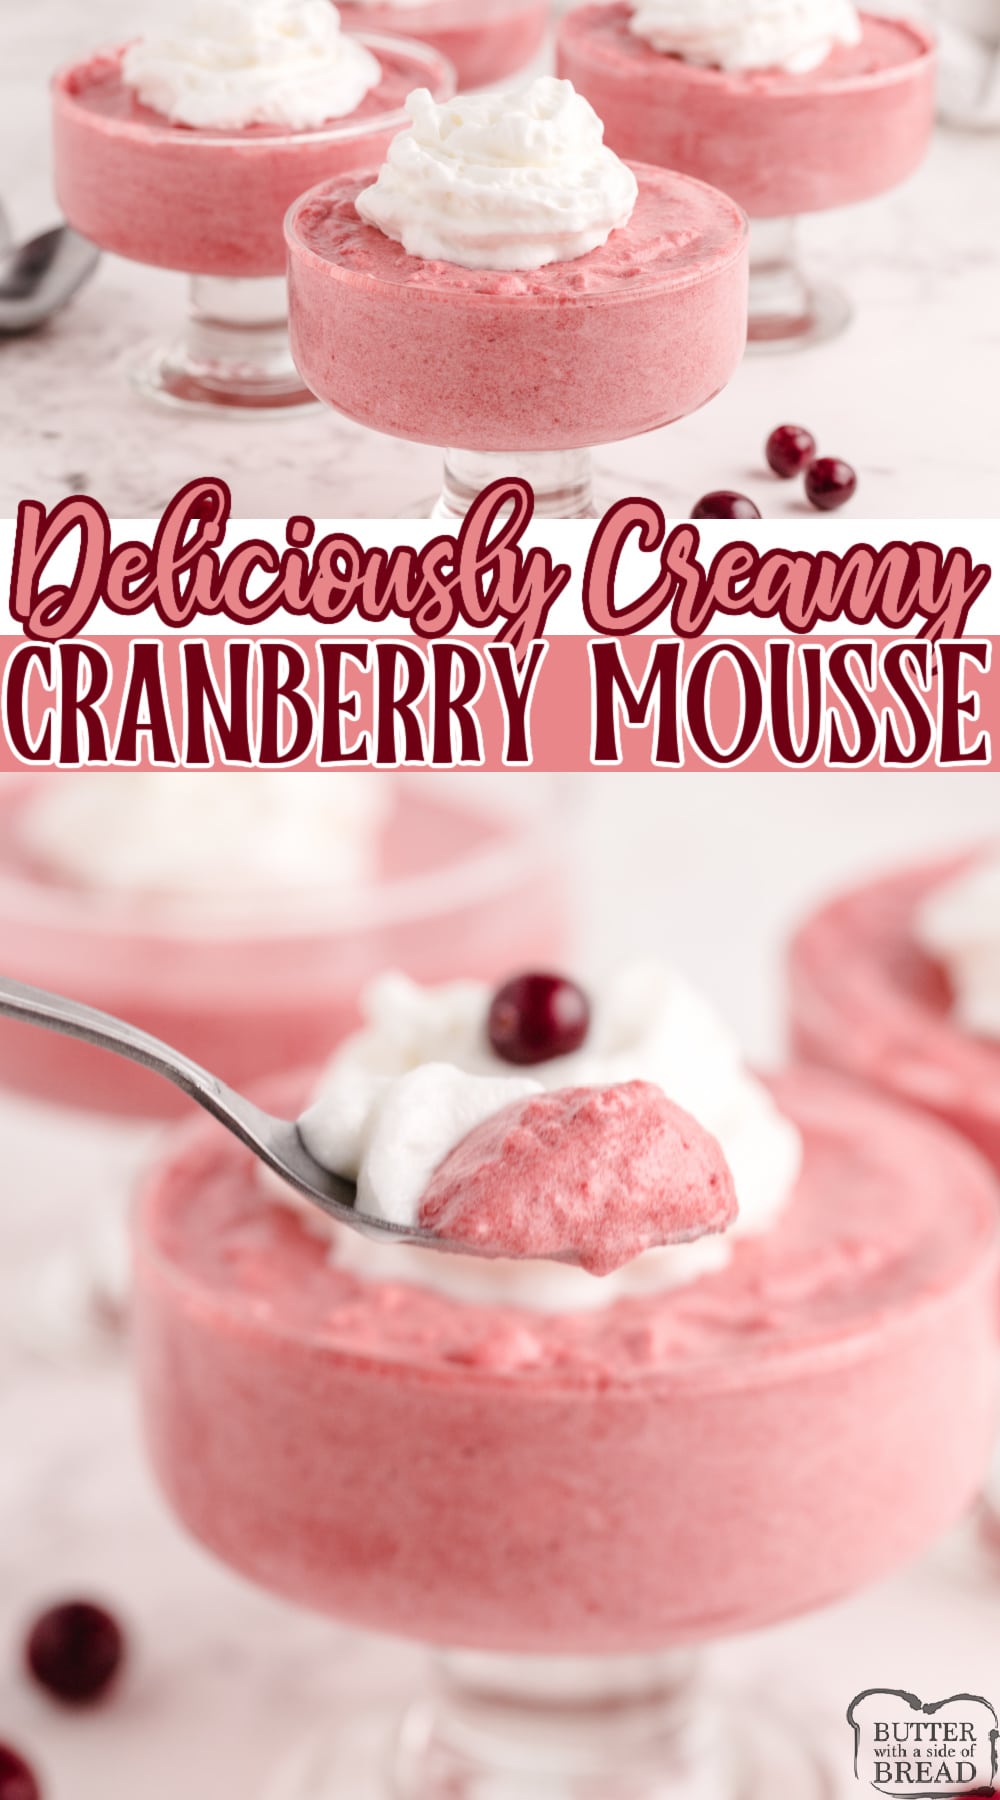 berry Mousse made with cranberry sauce, cranberry juice, Jello and whipped cream. Delicious cranberry dessert that is simple to make and delicious to eat!